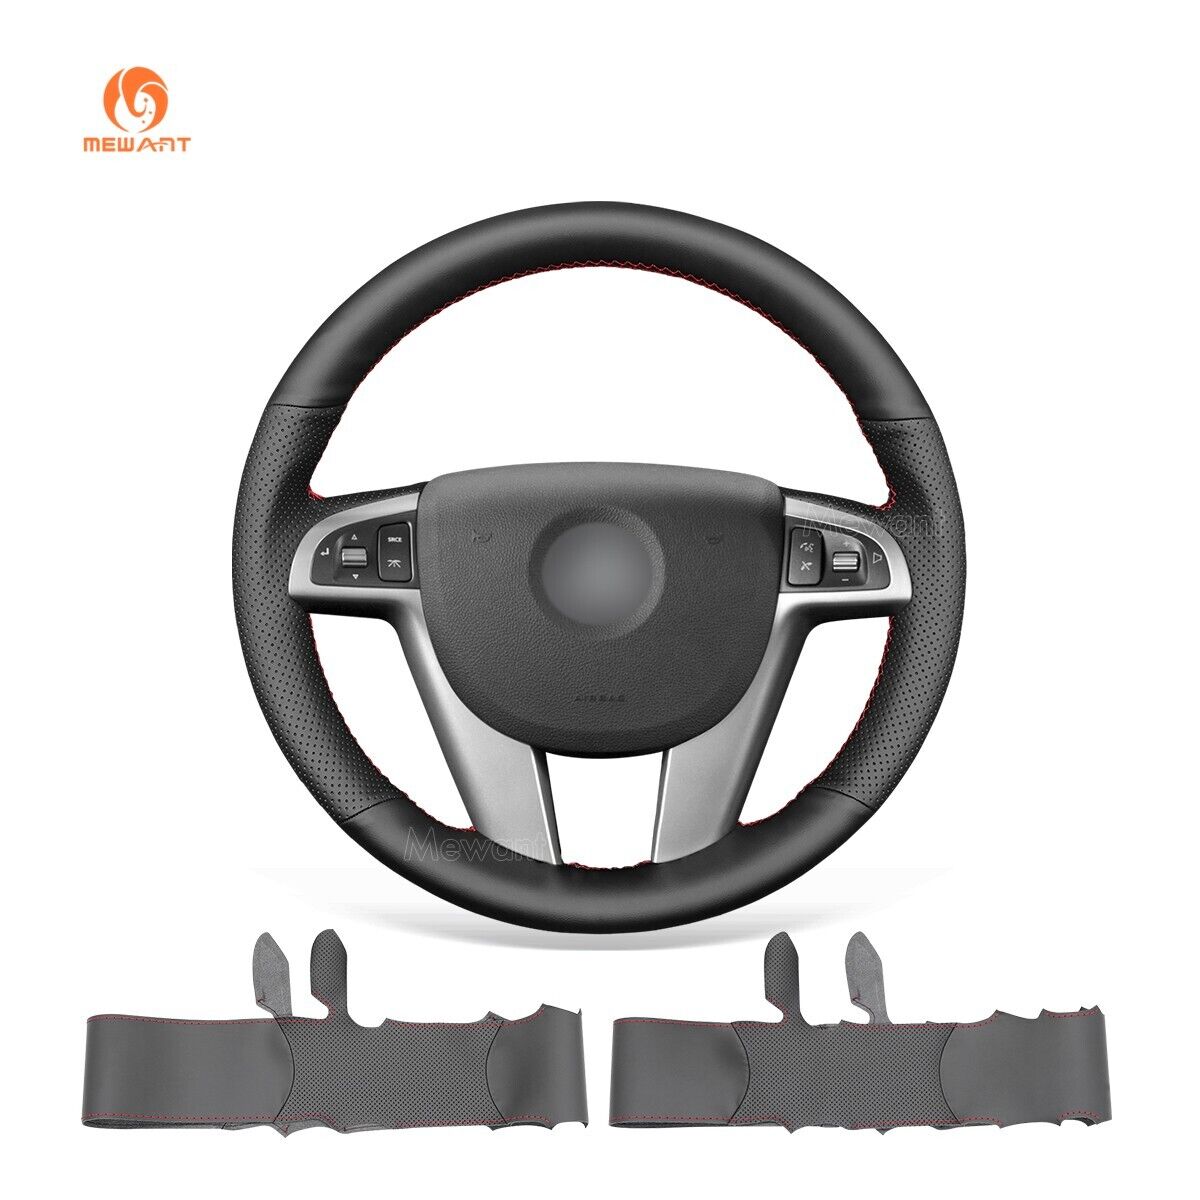 MEWANT PU Leather Steering Wheel Cover for Holden Commodore Ute Calais 2006-2012